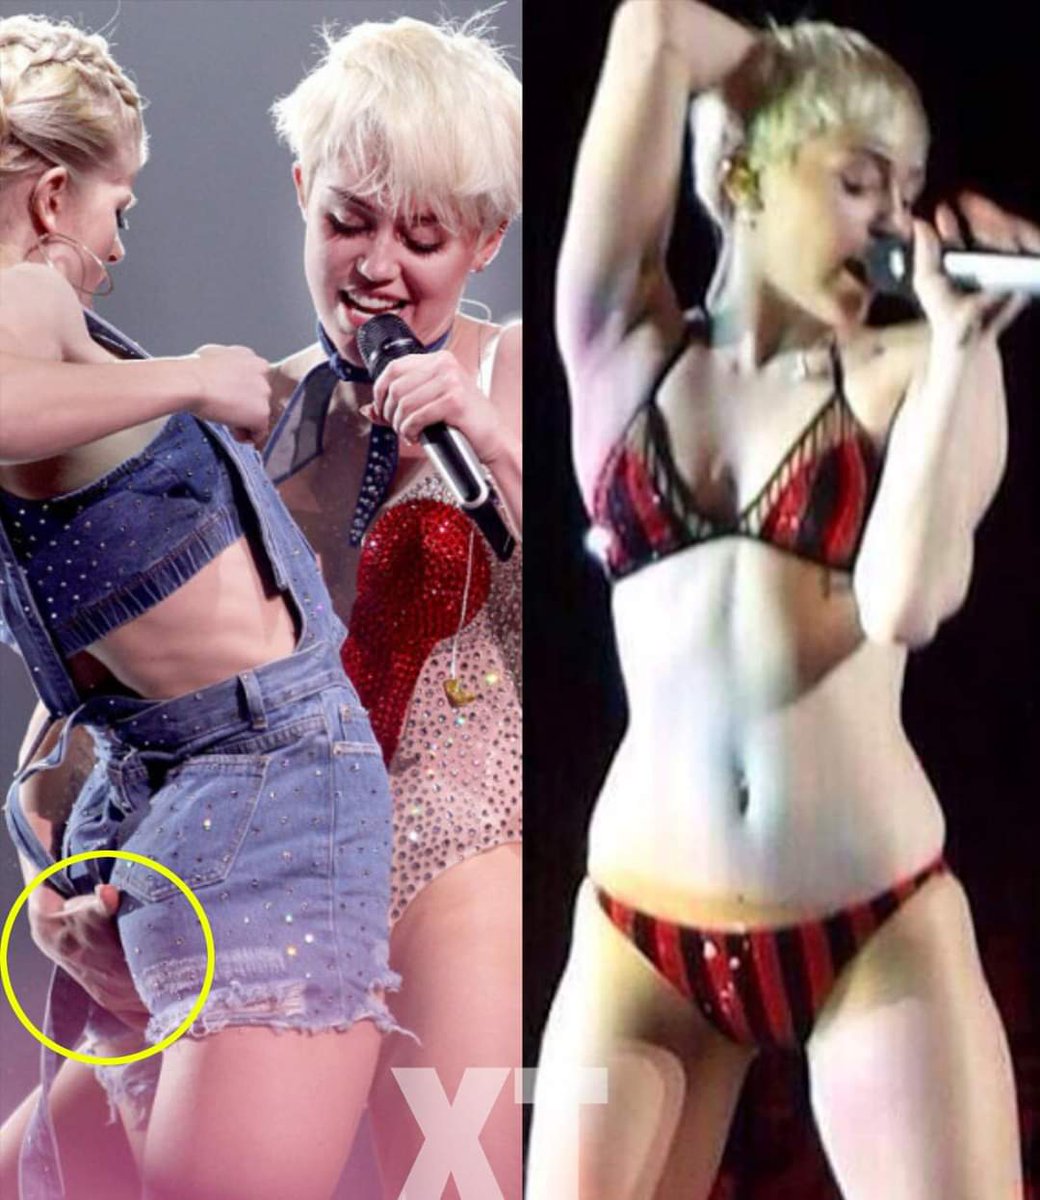 There is no such thing as pants during Miley Cyrus’s concert😂Miley Cyrus crazy on stage in just her underwear😜😜😜🔥#HOTFASHION2024 #viralpage2024 #celebrities #leak#hot #BOOMchallenge